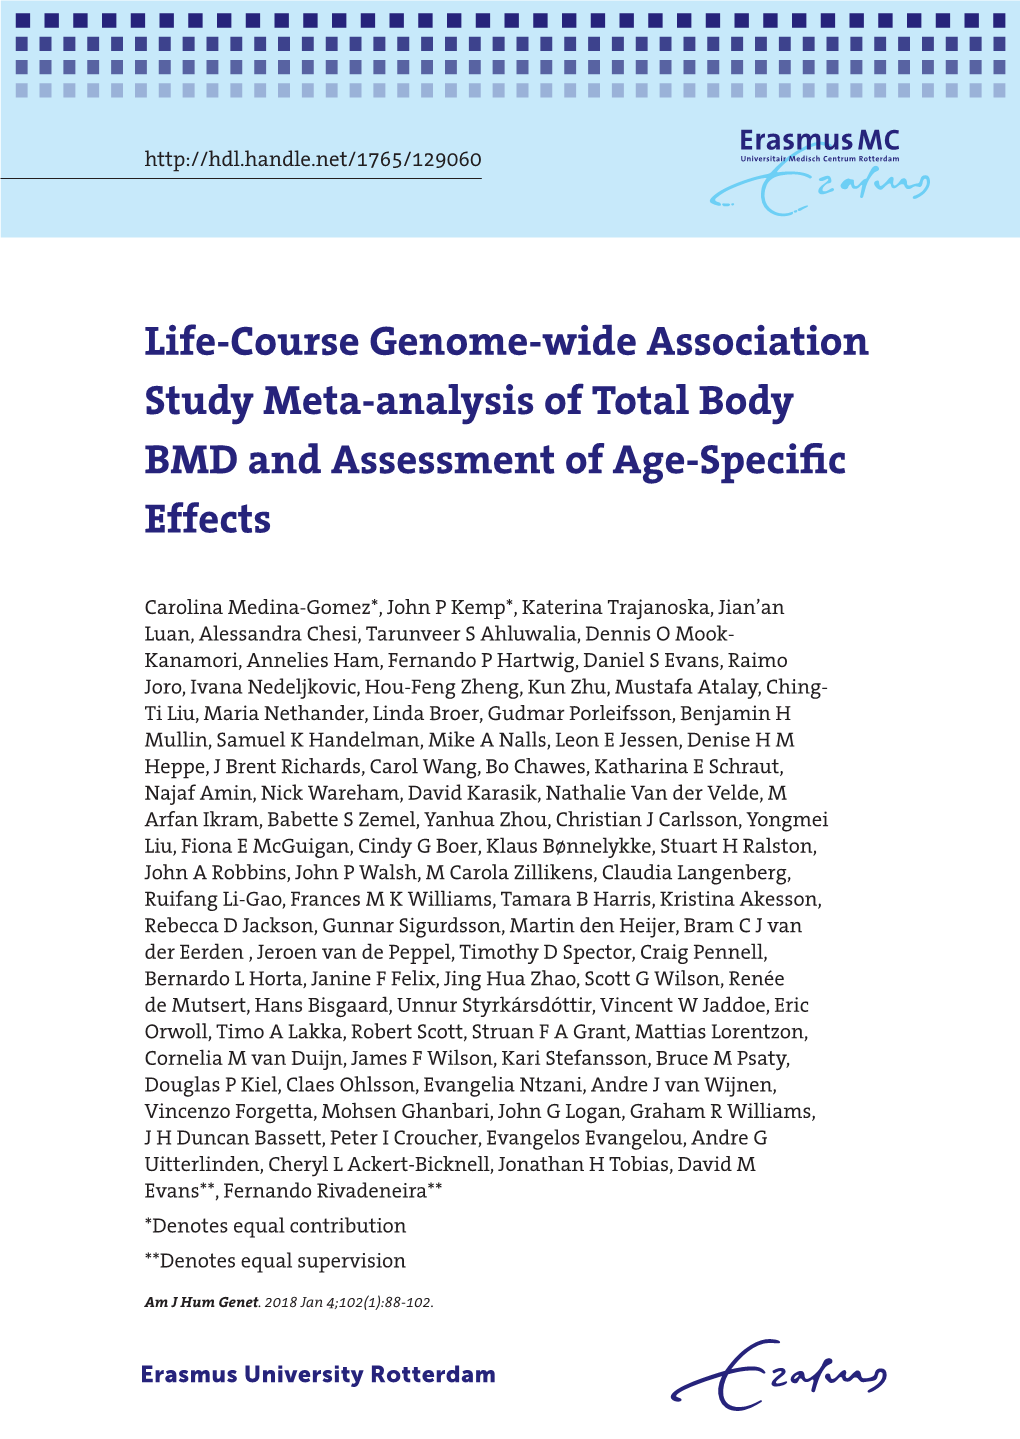 Life-Course Genome-Wide Association Study Meta-Analysis of Total Body BMD and Assessment of Age-Speciﬁ C